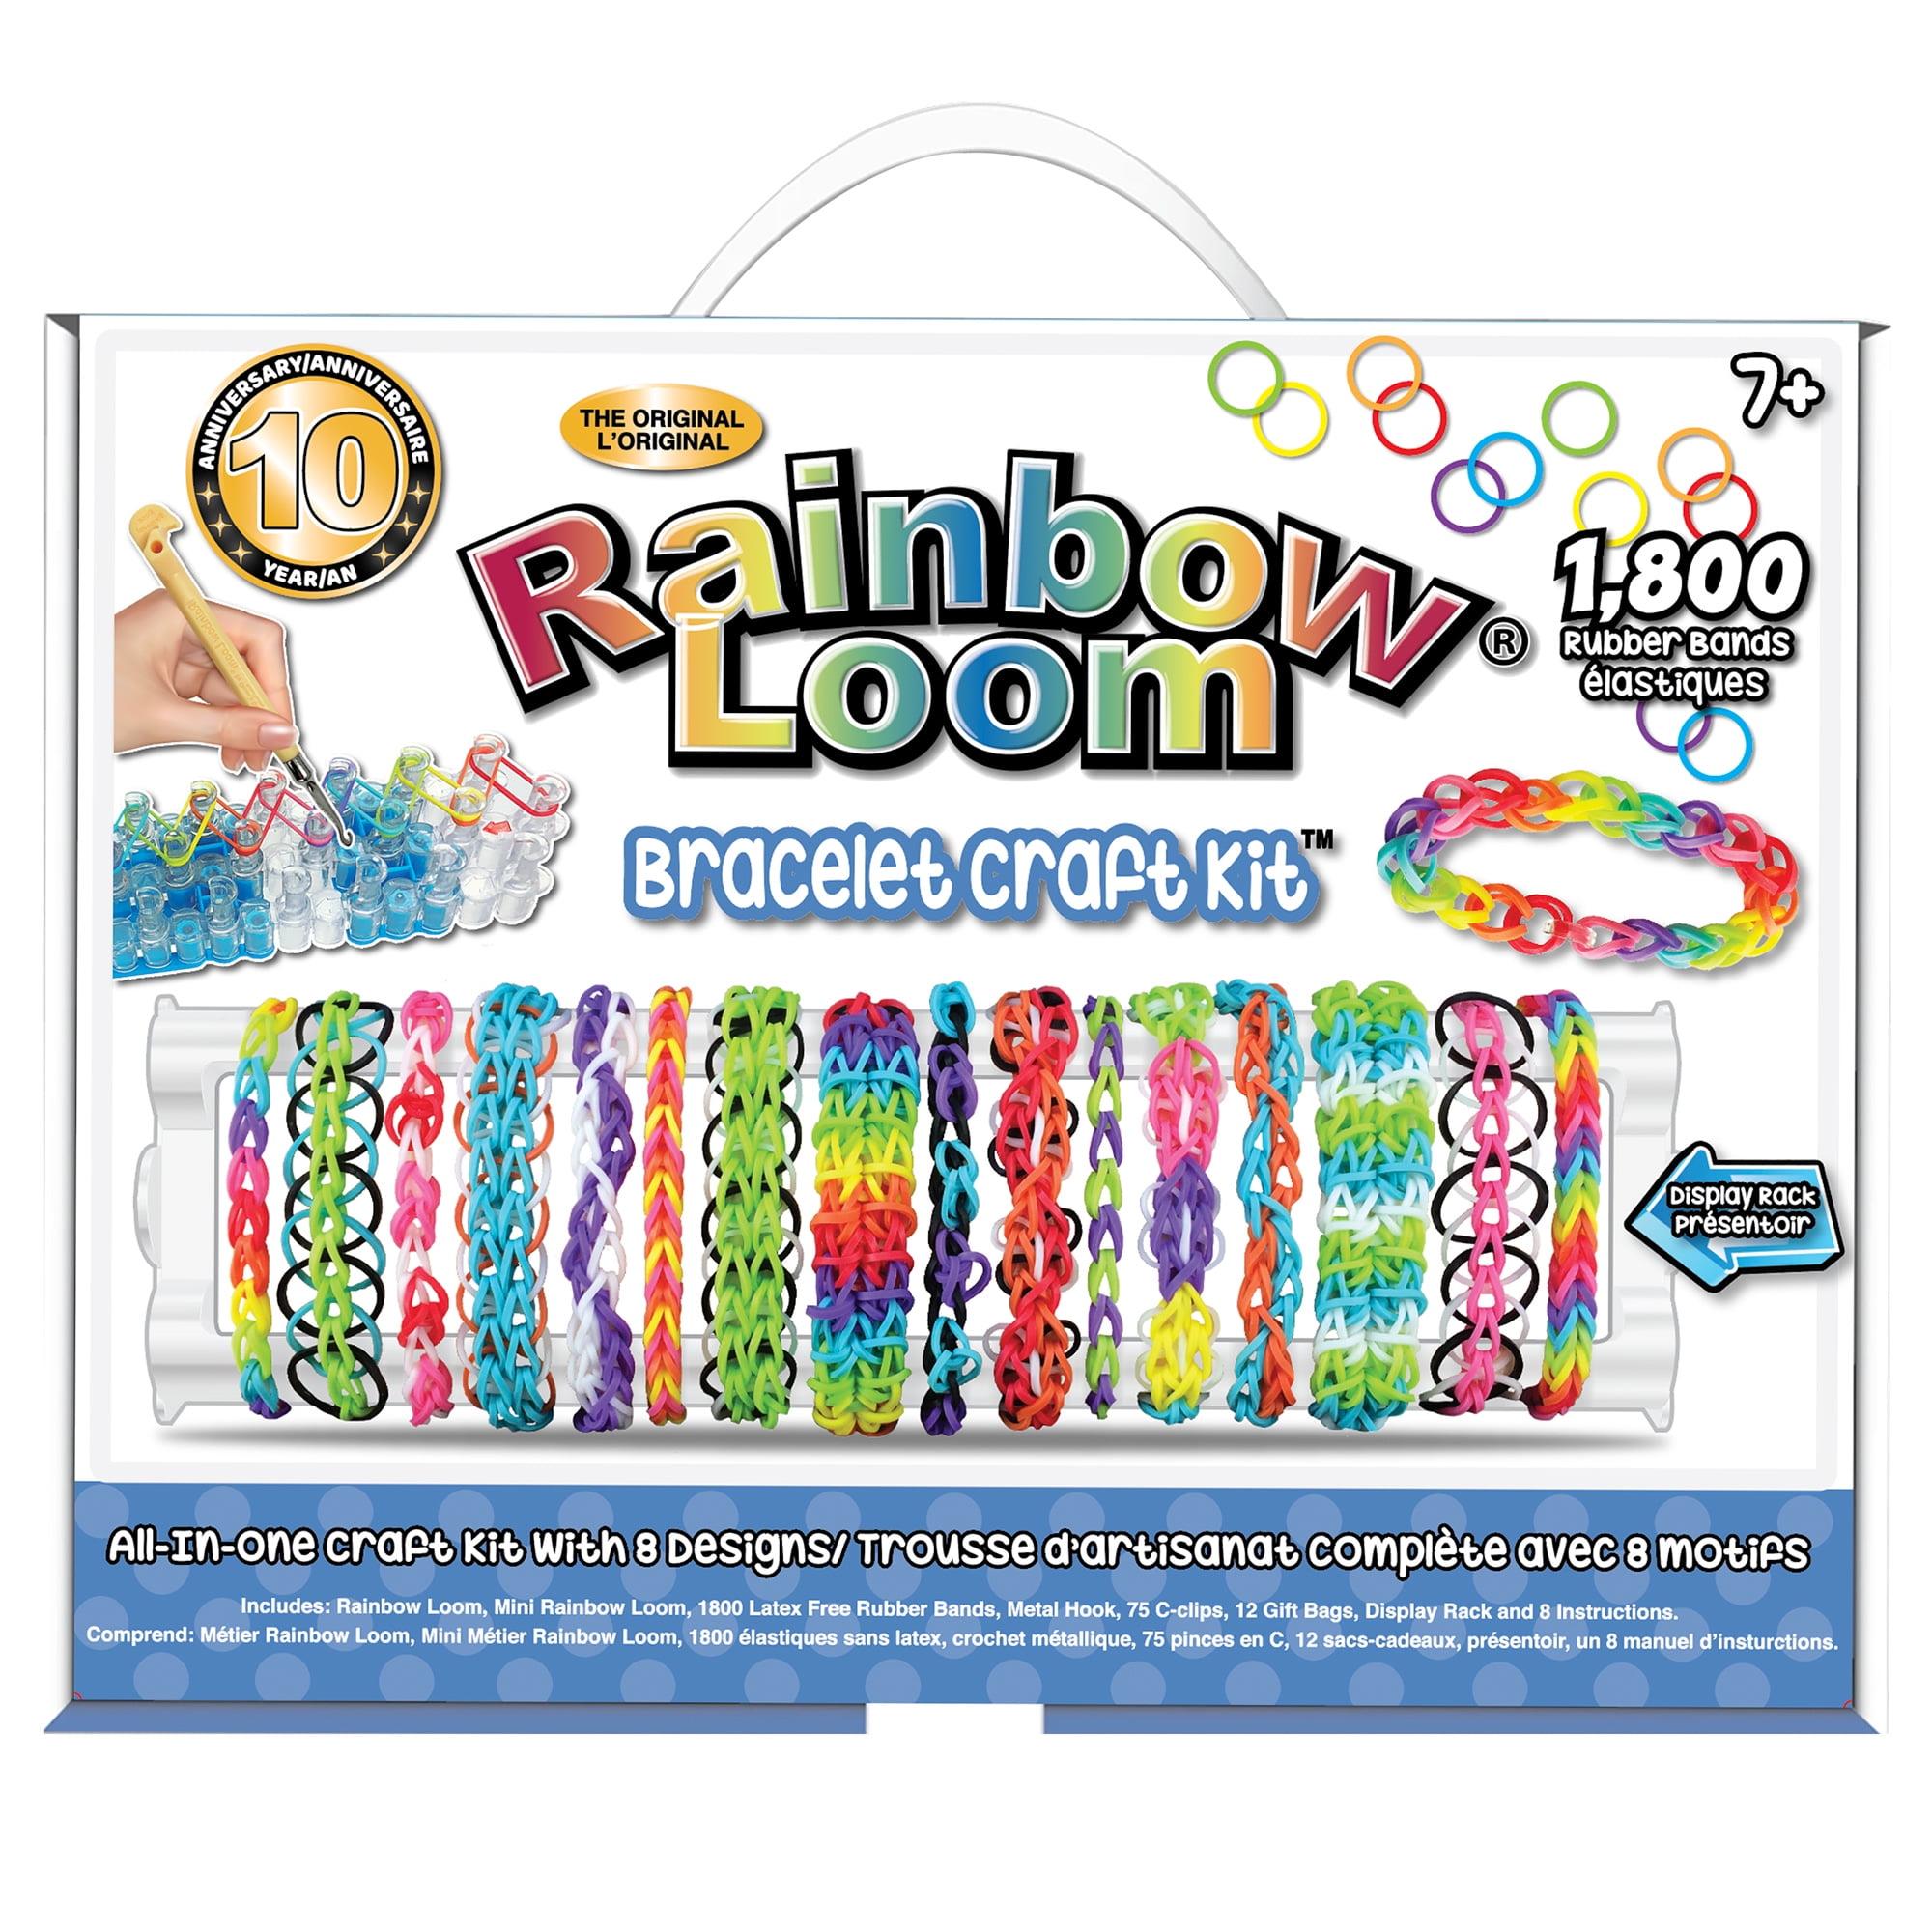 slang deeltje Reis Rainbow Loom- Rubber Band Bracelet Craft Kit, 1,800 Rubber Bands Included,  8 Different Designs to Create, 5 Compartments For Easy Storage, High  Quality Craft for Ages 7 and Up - Walmart.com